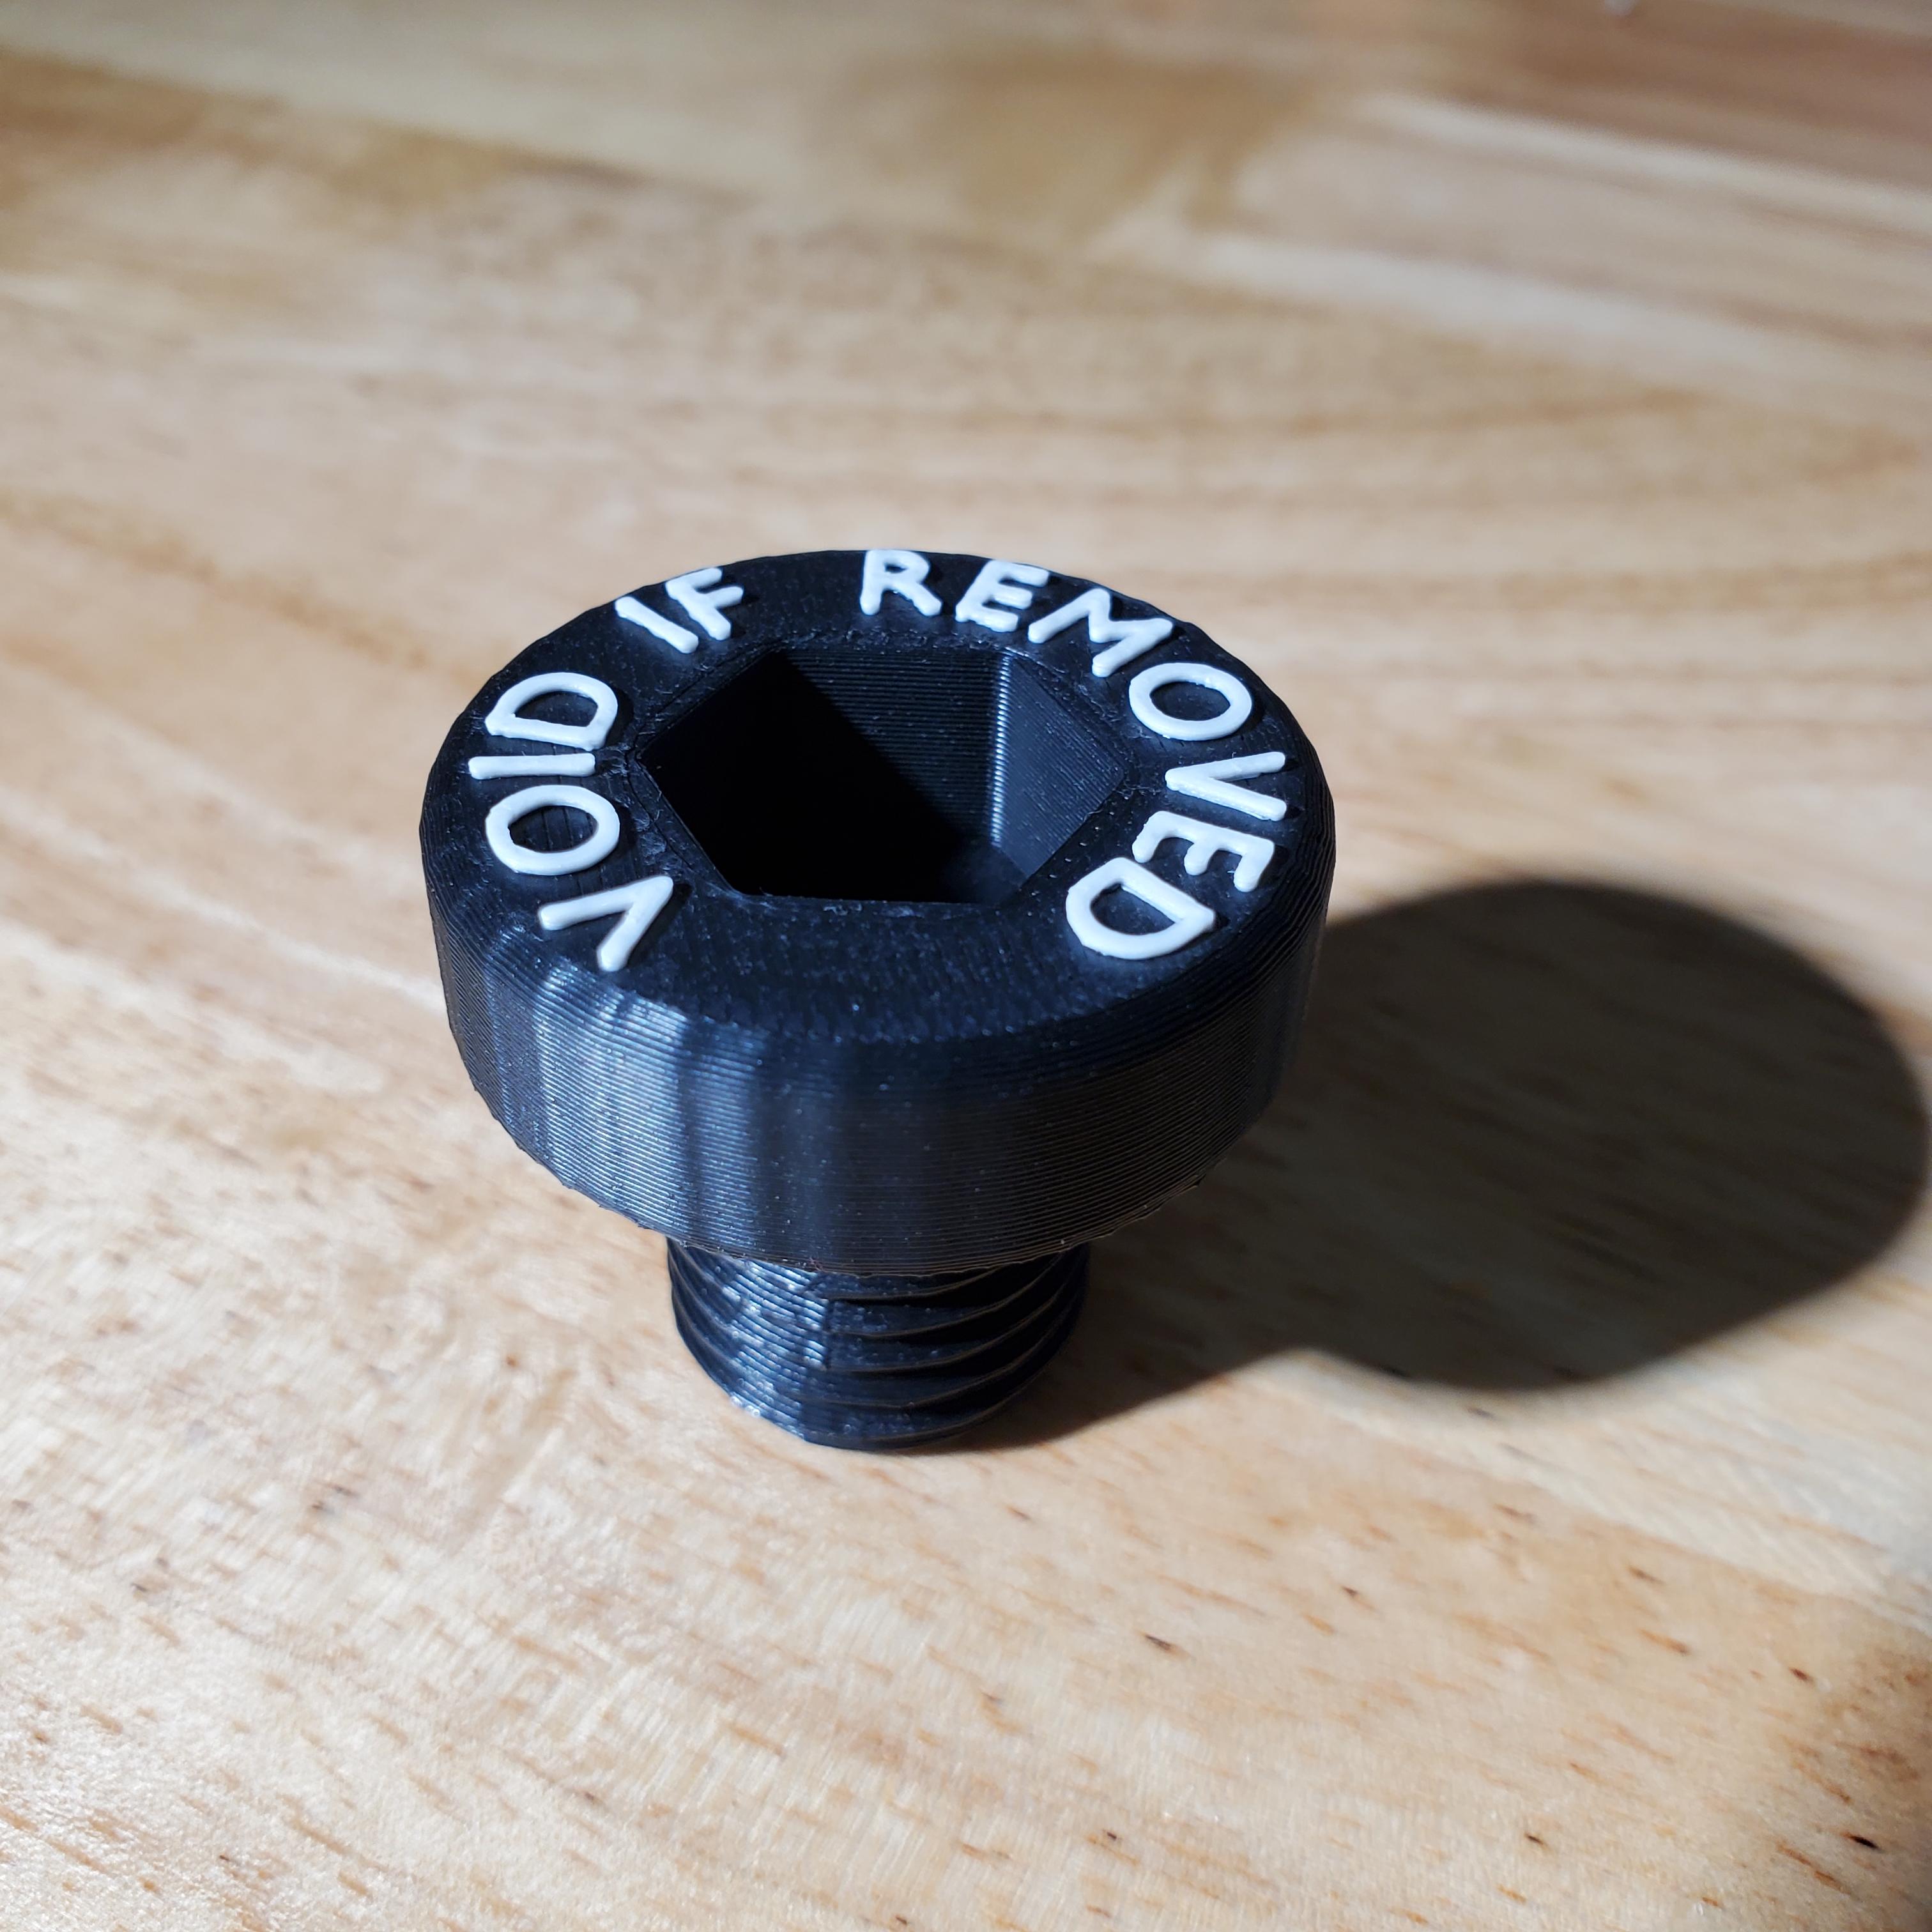 "Void if Removed" warranty indicator screw 3d model